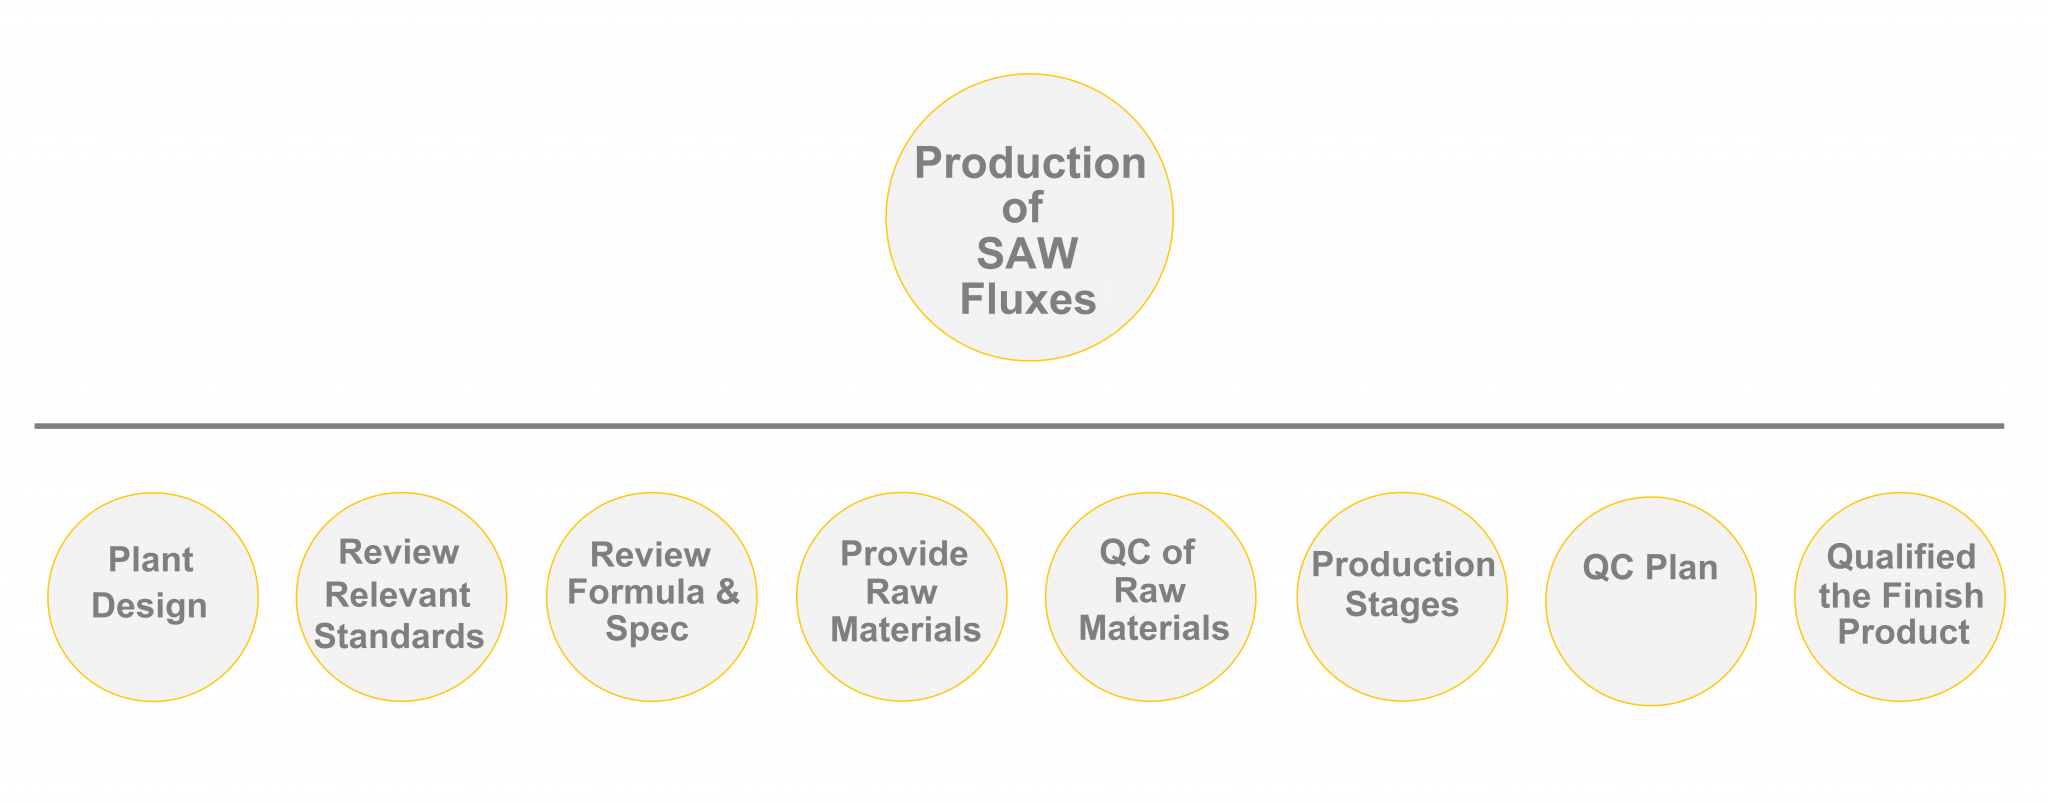 Production of SAW fLUX